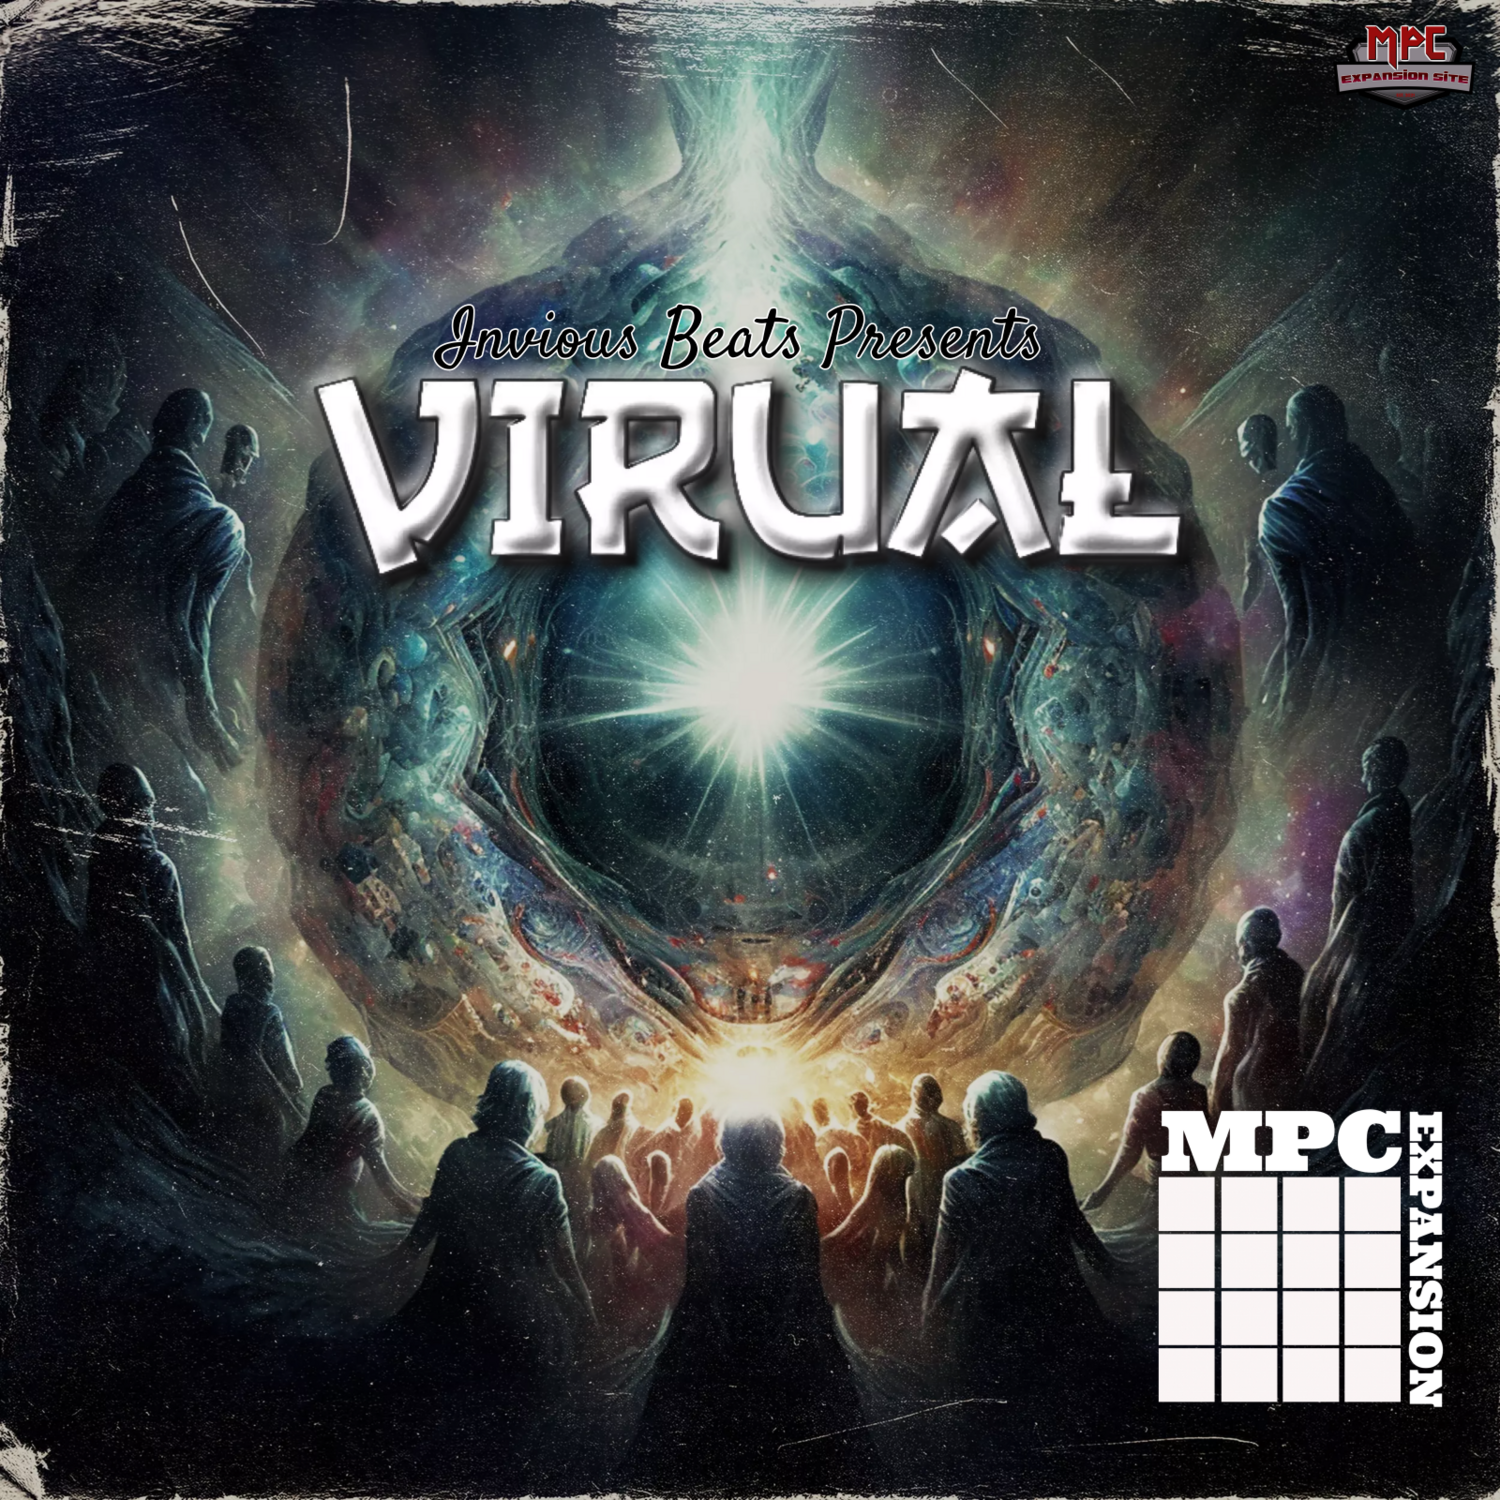 MPC EXPANSION 'VIRUAL' by INVIOUS